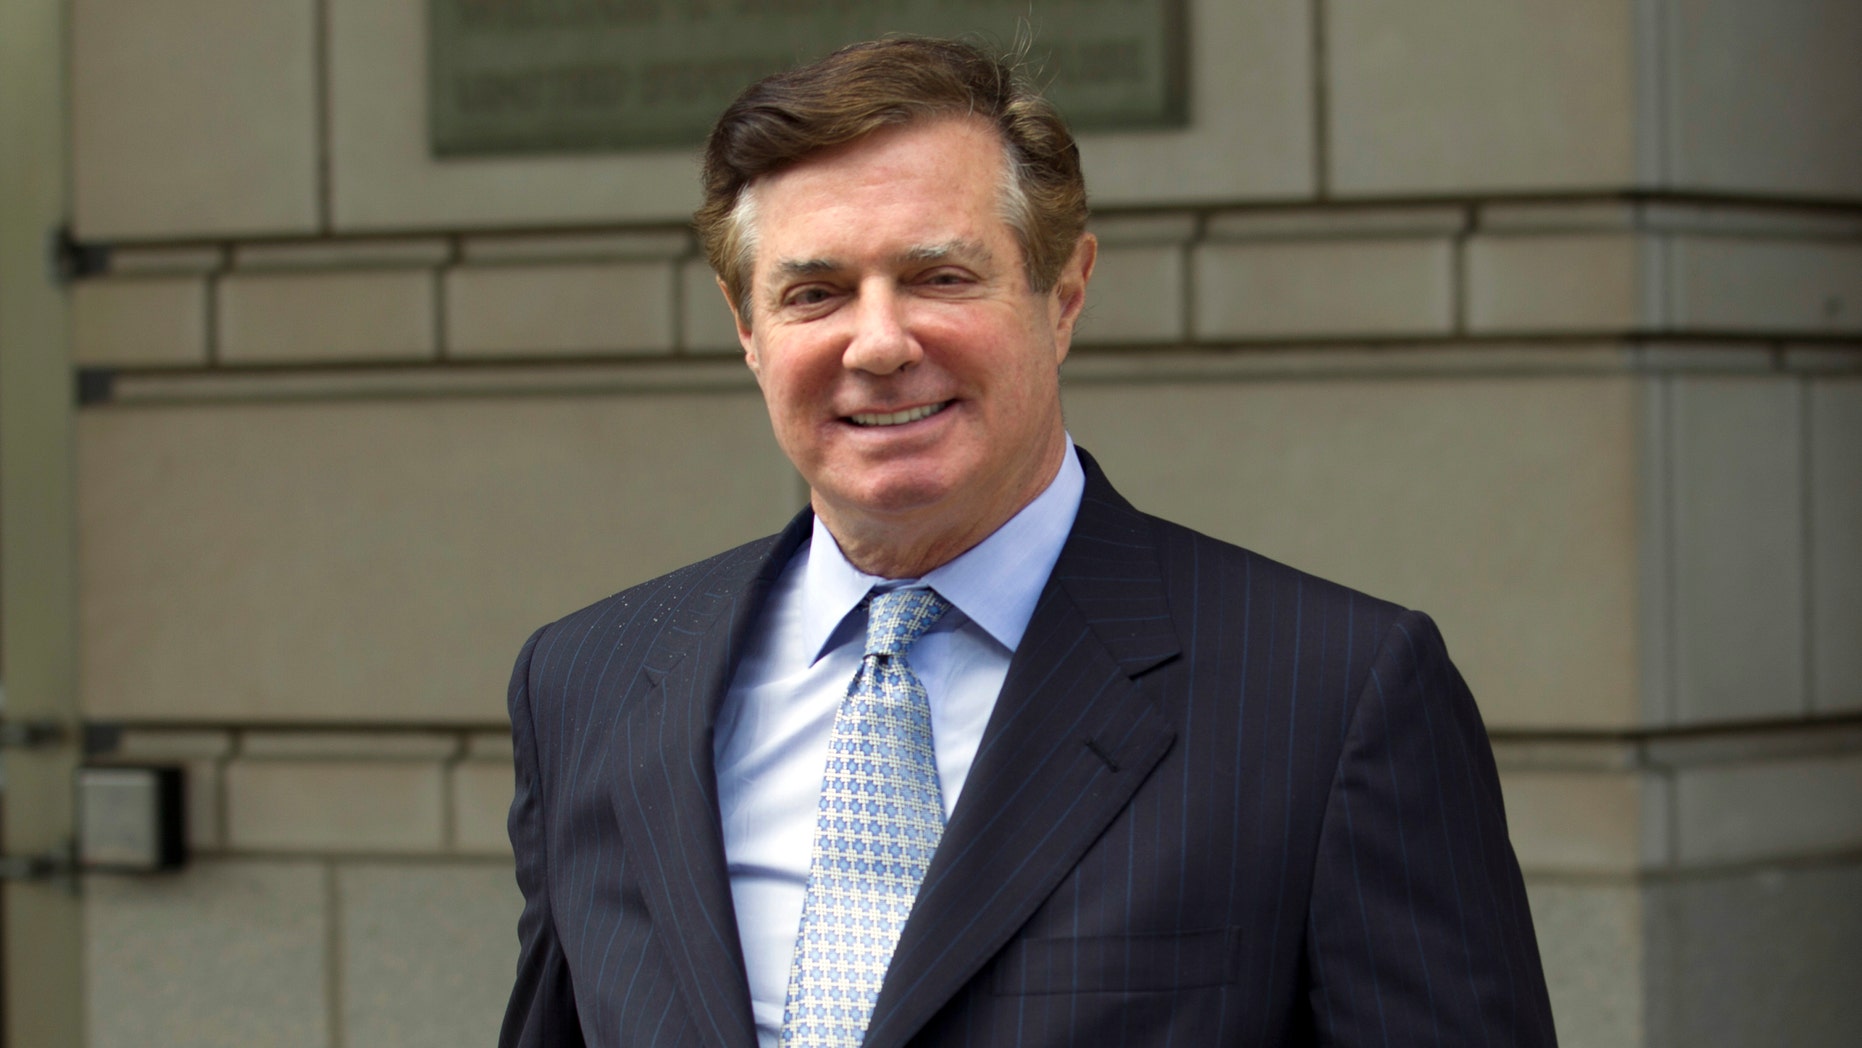 Law firm tied to Manafort